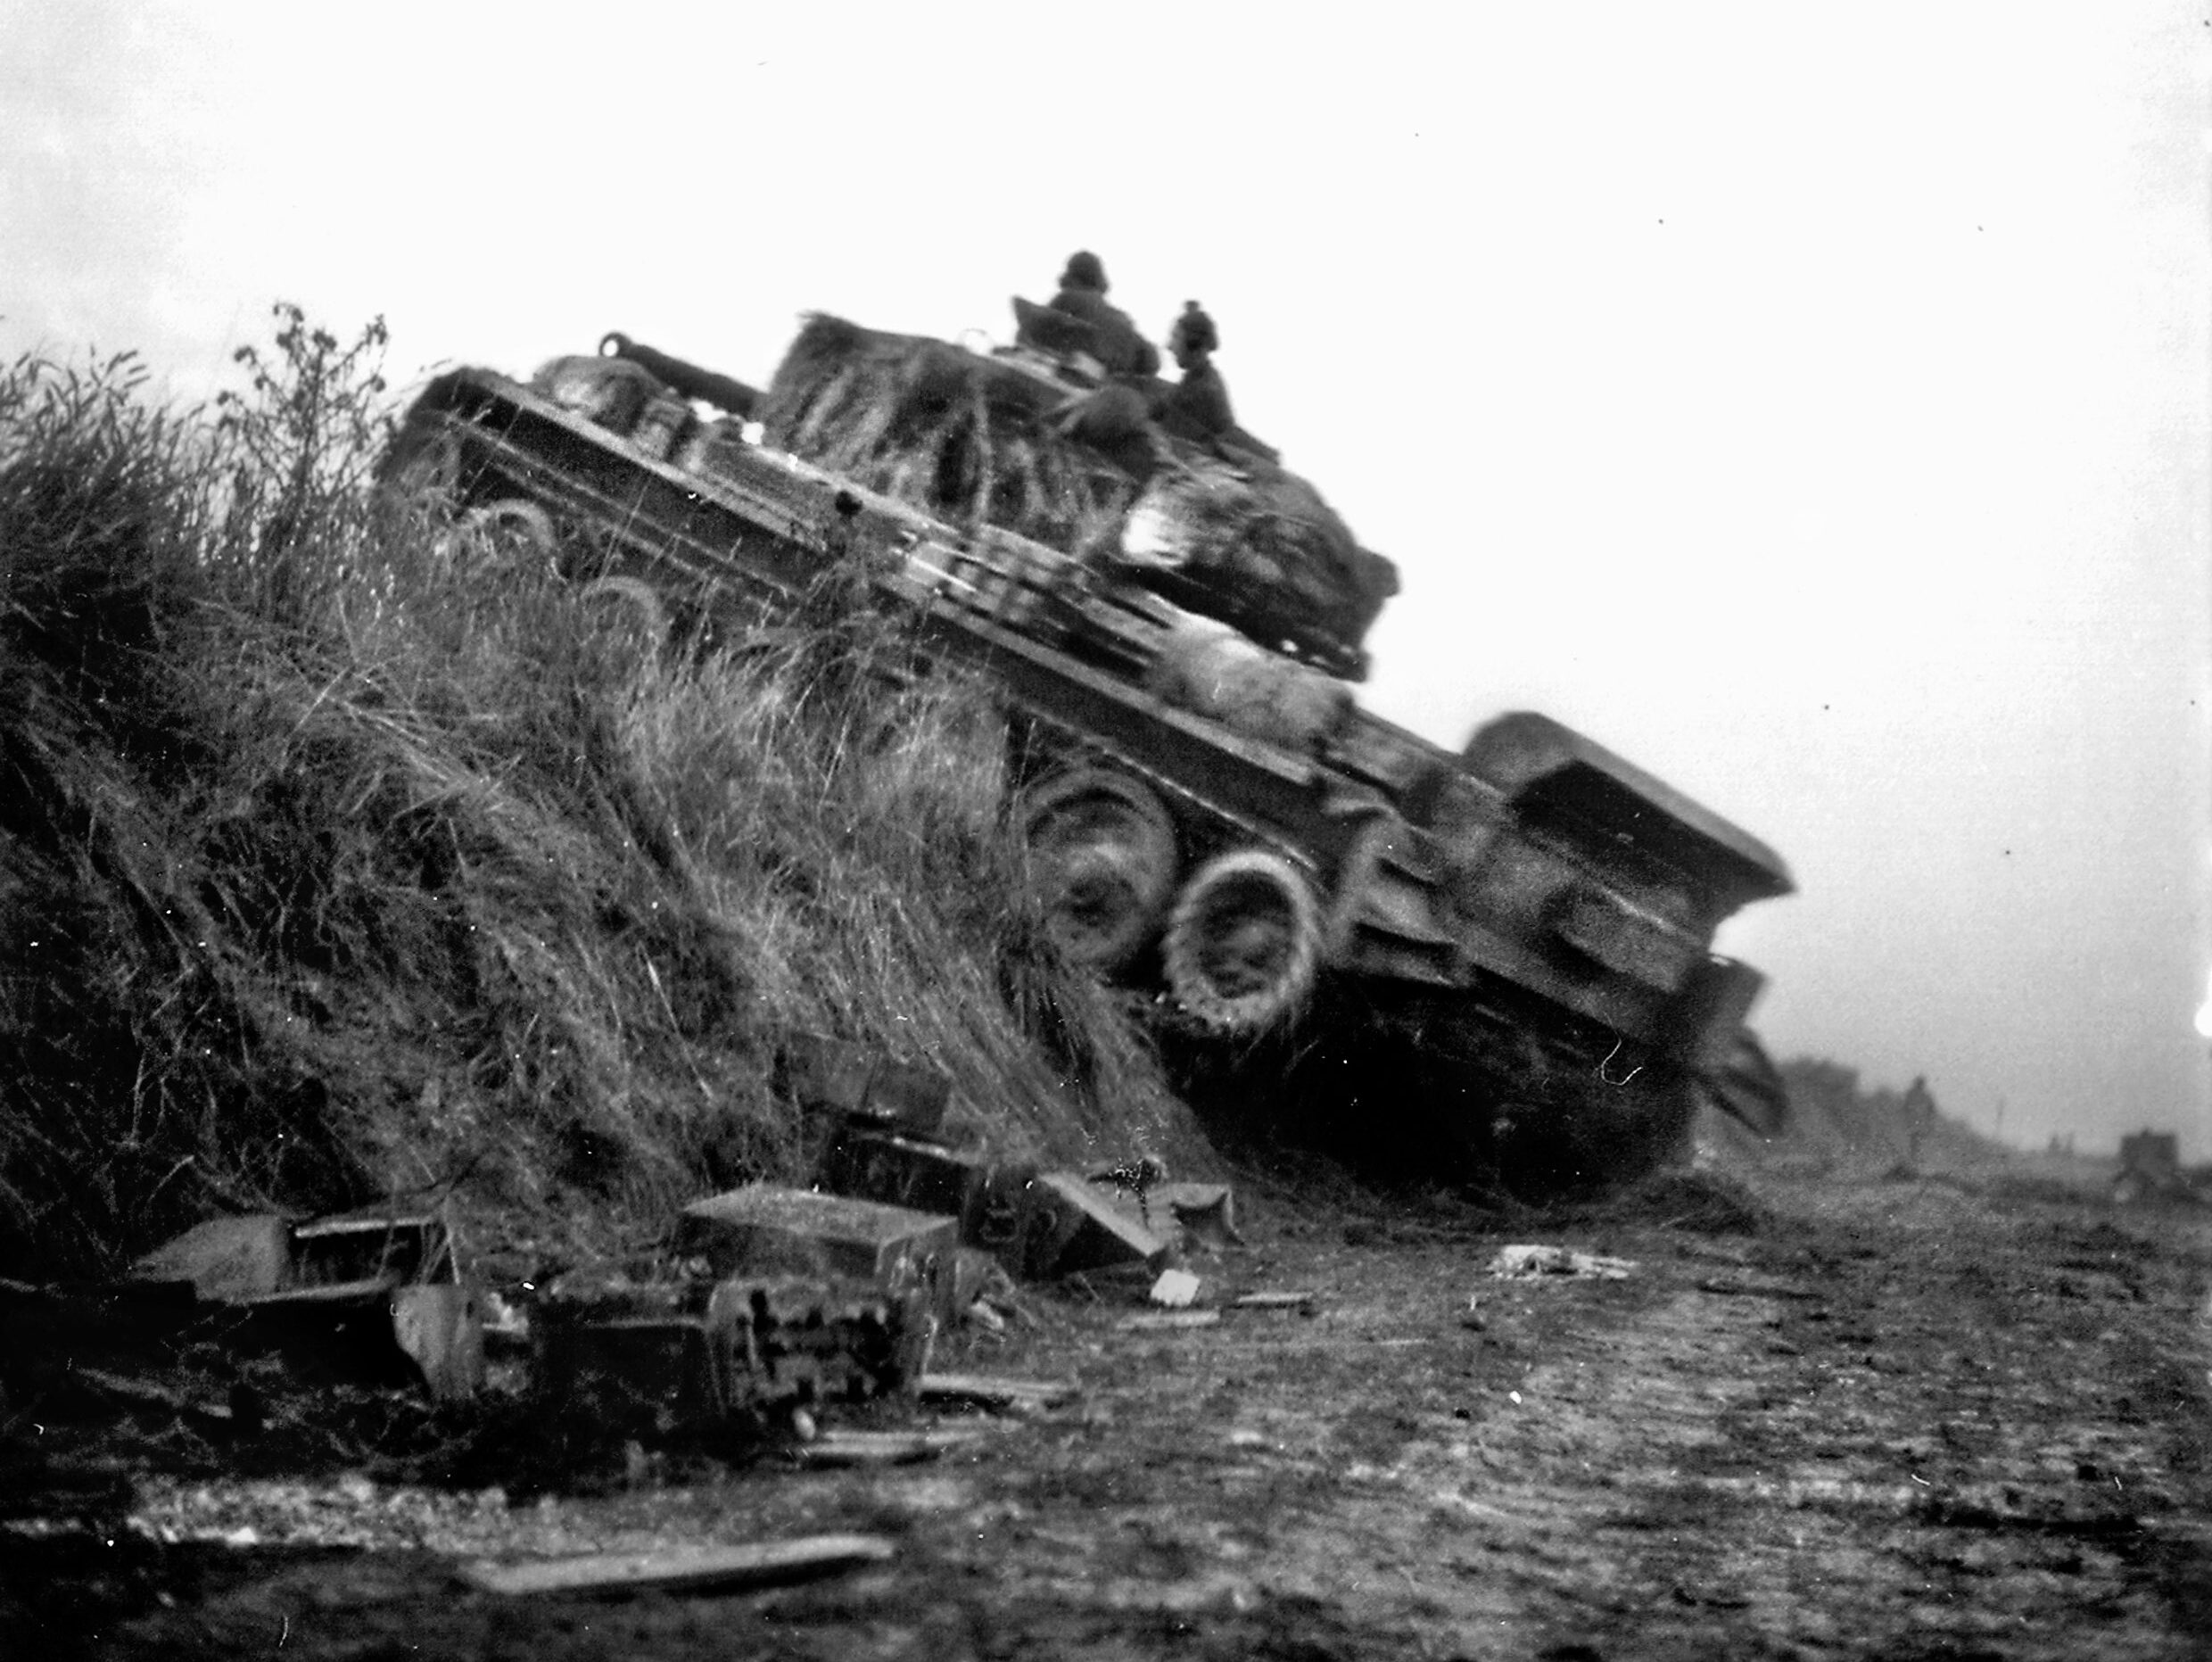 A Cromwell tank of a Canadian armored regiment climbs a hill during the intense fighting in Normandy following D-Day. Canadian troops came ashore at Juno Beach and contributed substantially to the eventual Allied breakout and defeat of the enemy around Falaise.